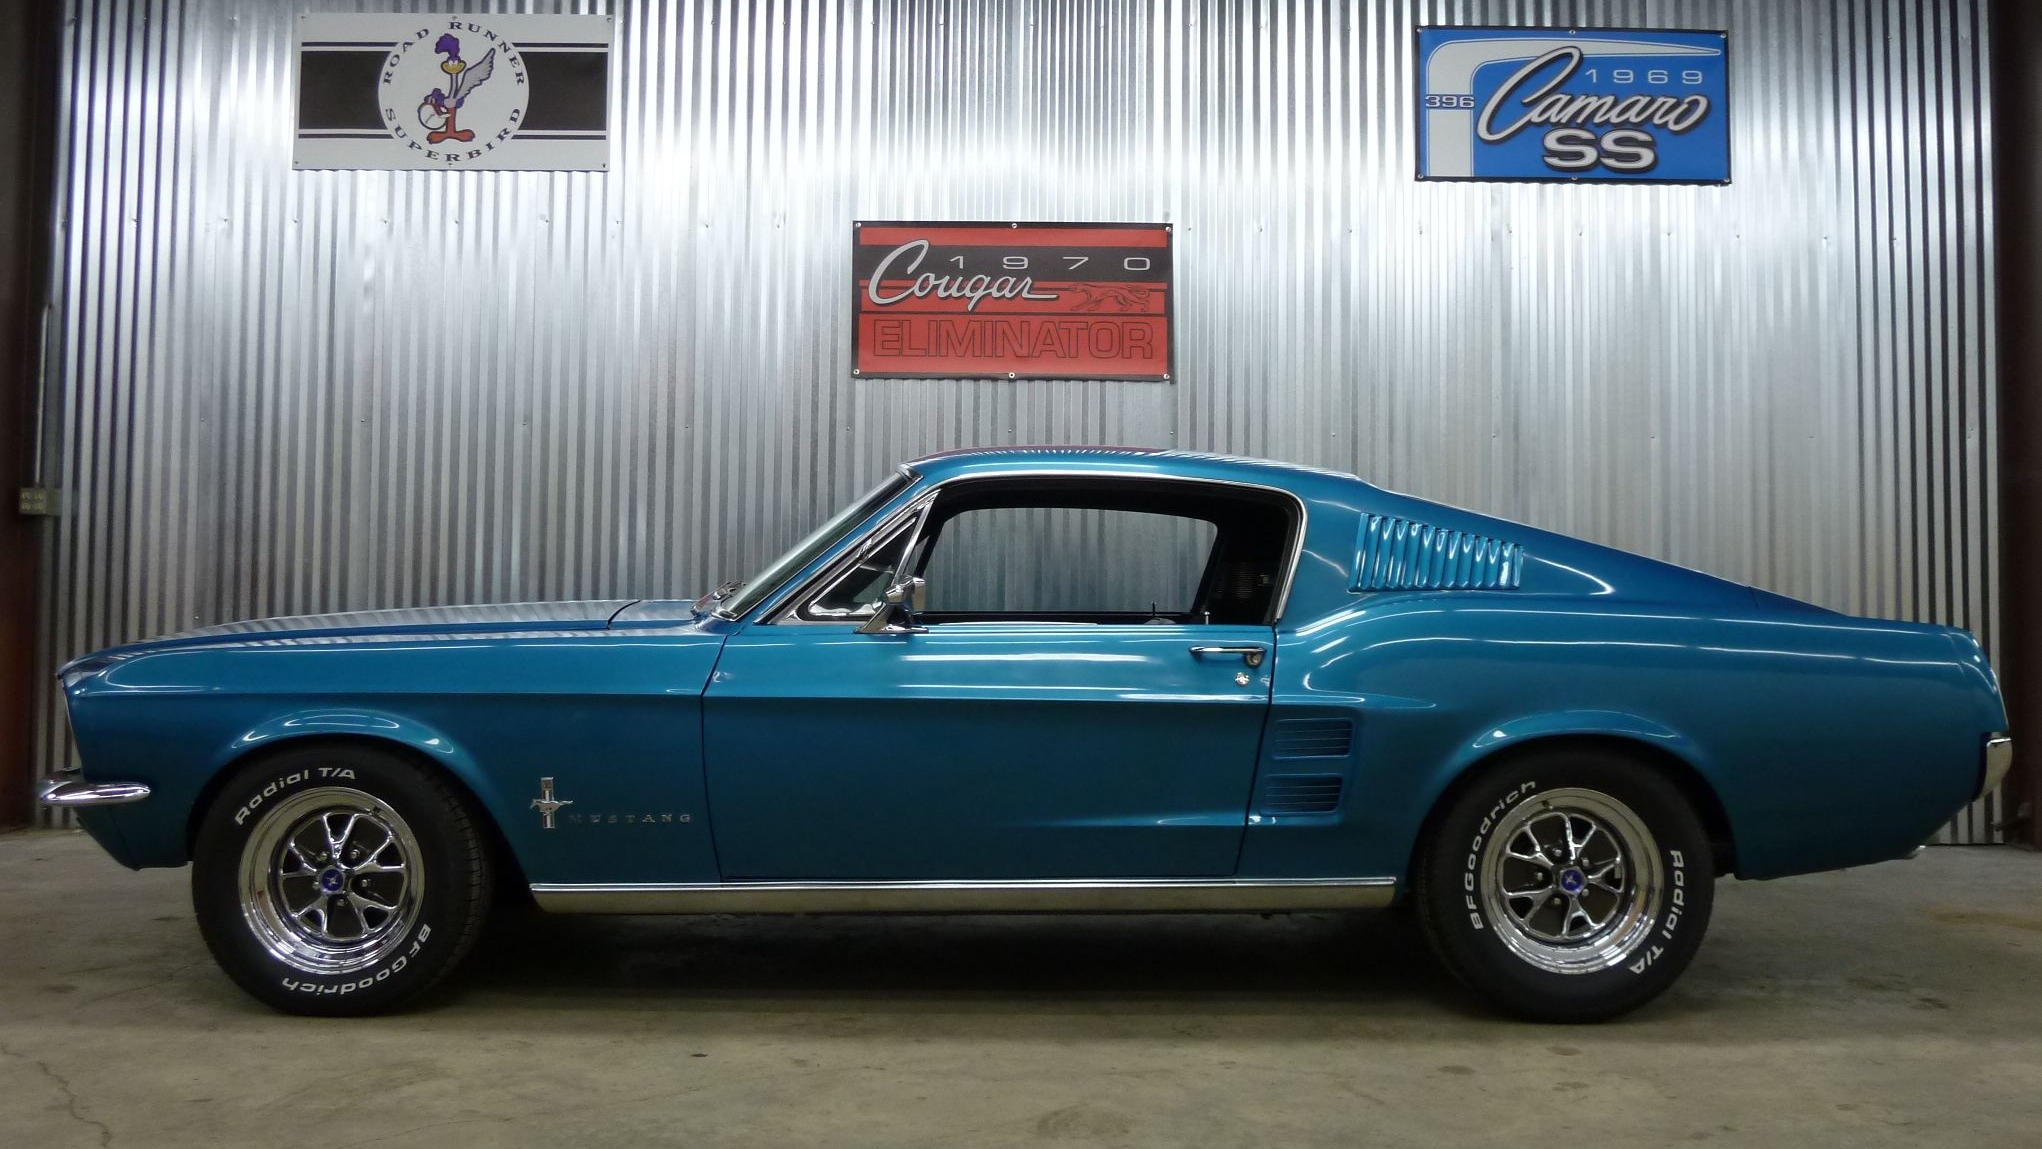 vertical wallpaper vehicles, ford mustang fastback, fastback, ford mustang, muscle car, ford